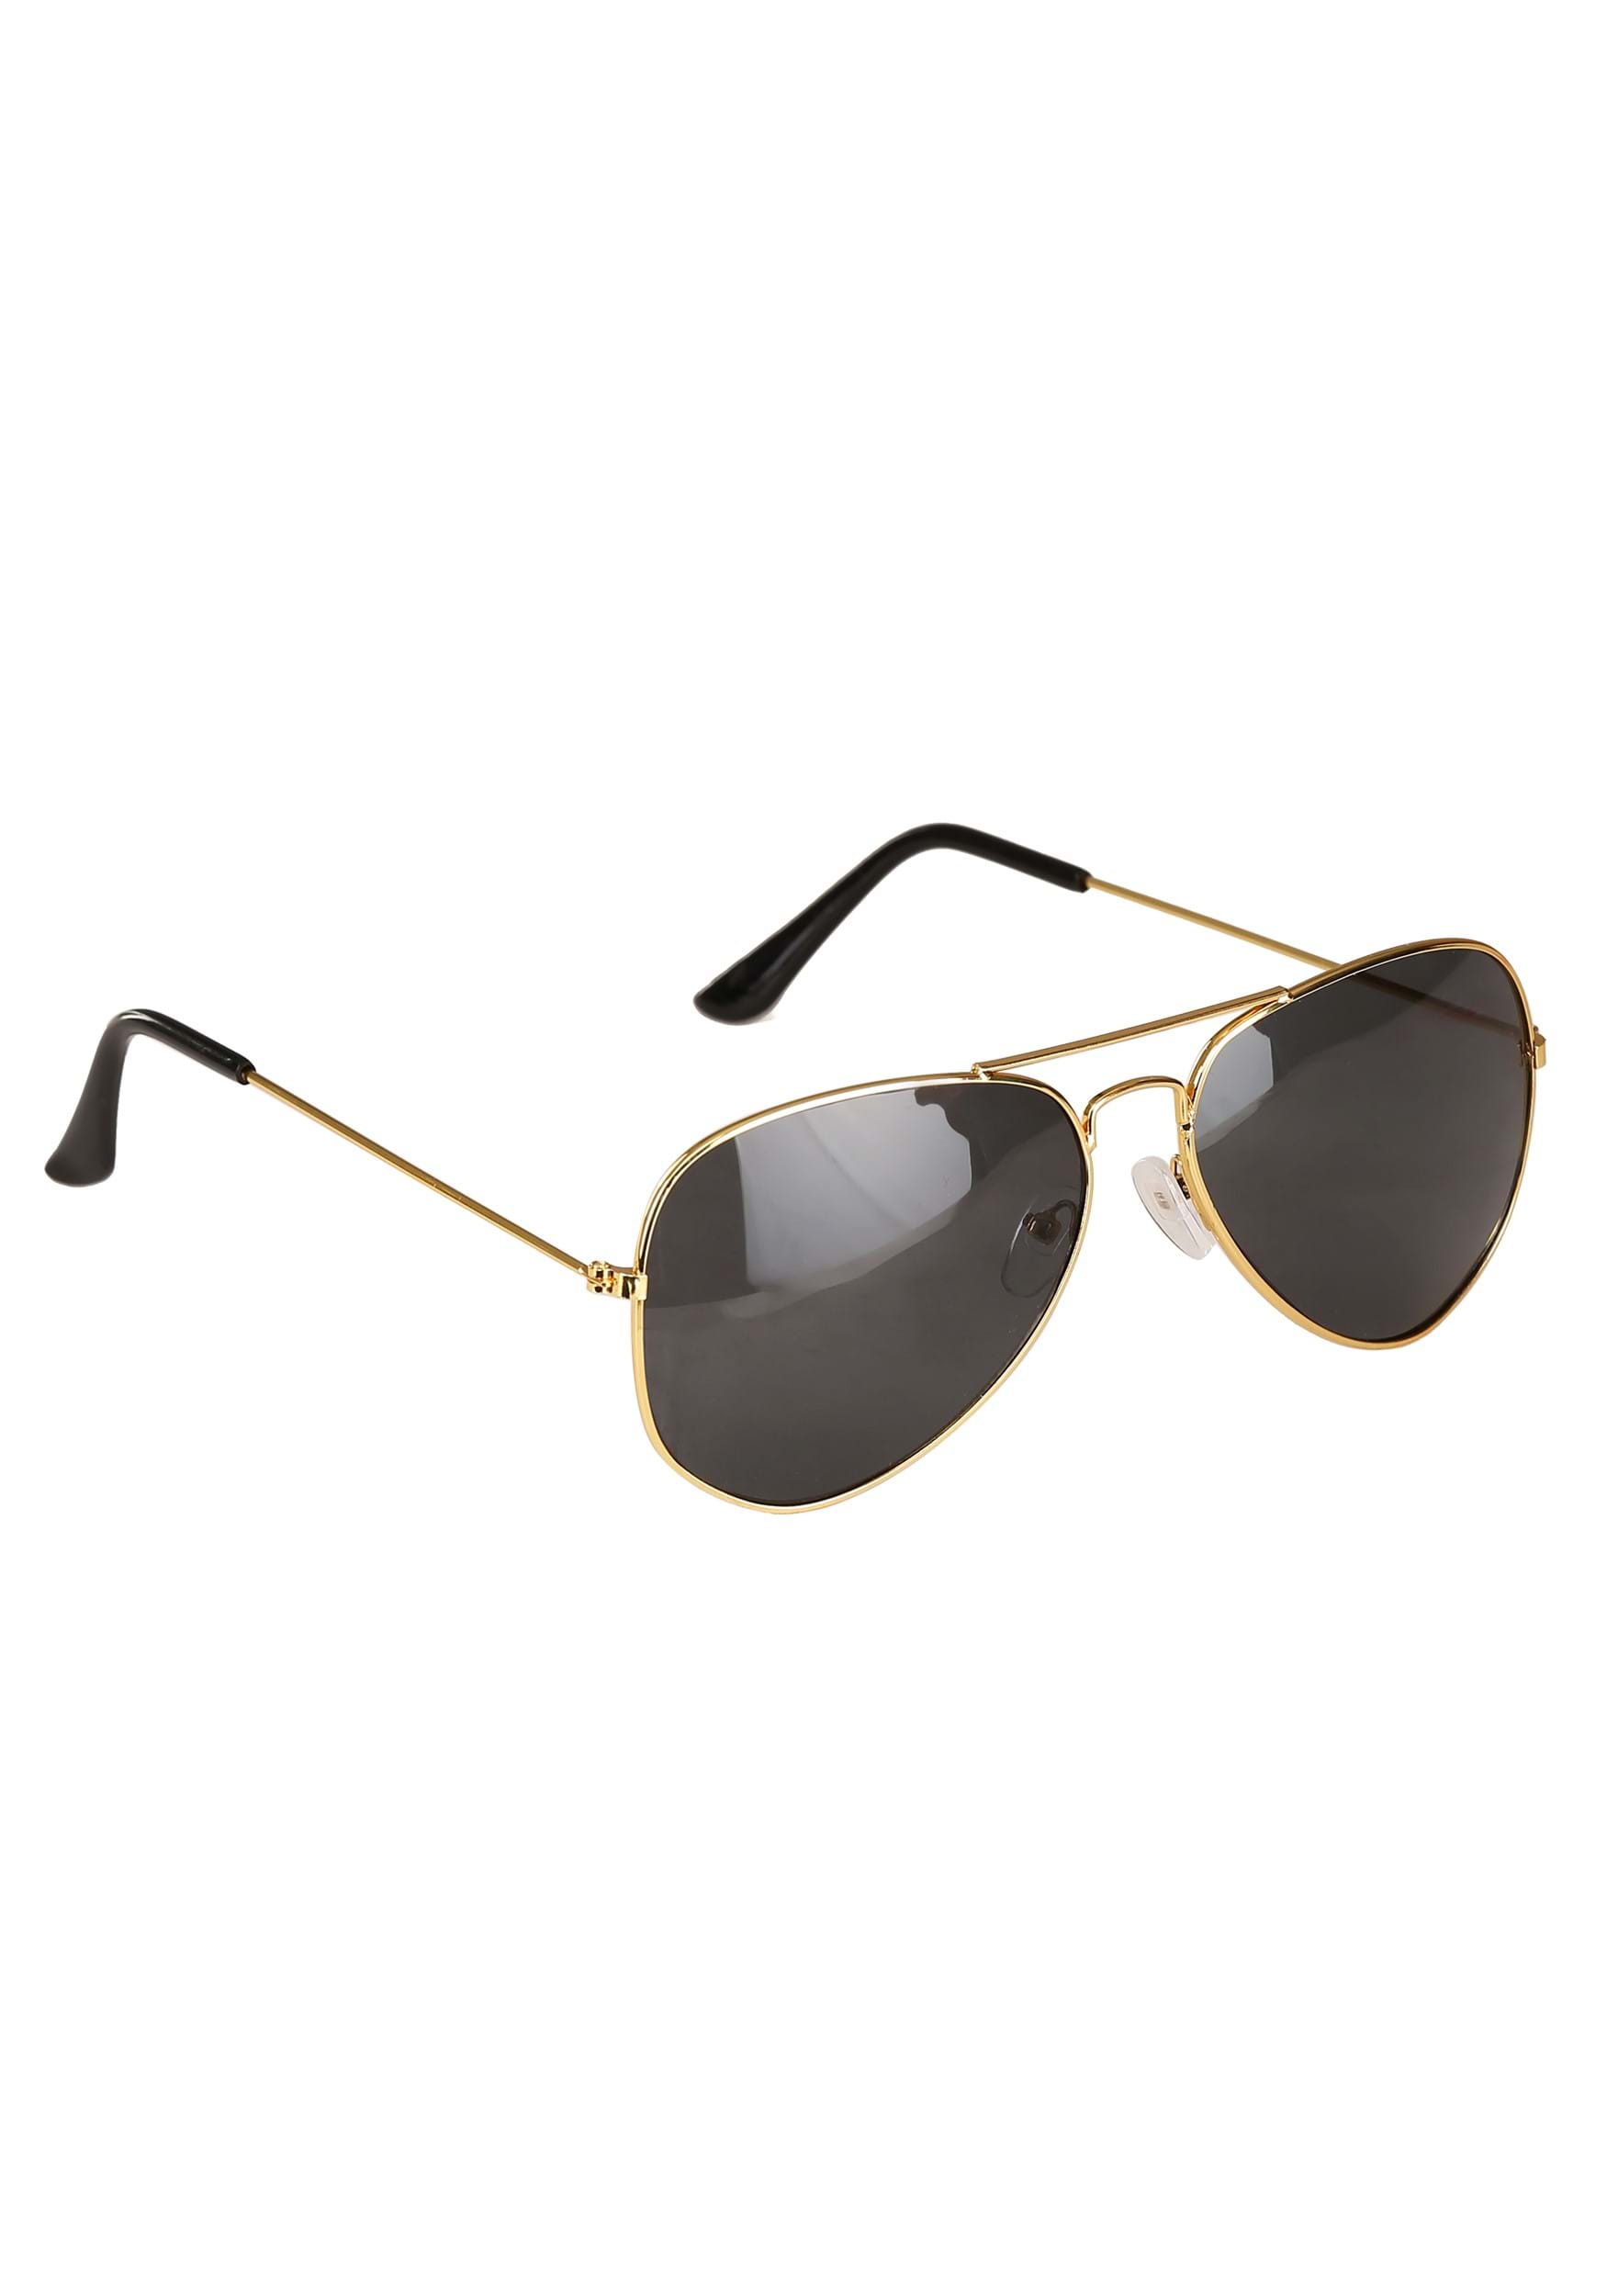 Buy Ray-Ban 0RB3025 Grey Clear Aviator - 54 mm Online At Best Price @ Tata  CLiQ